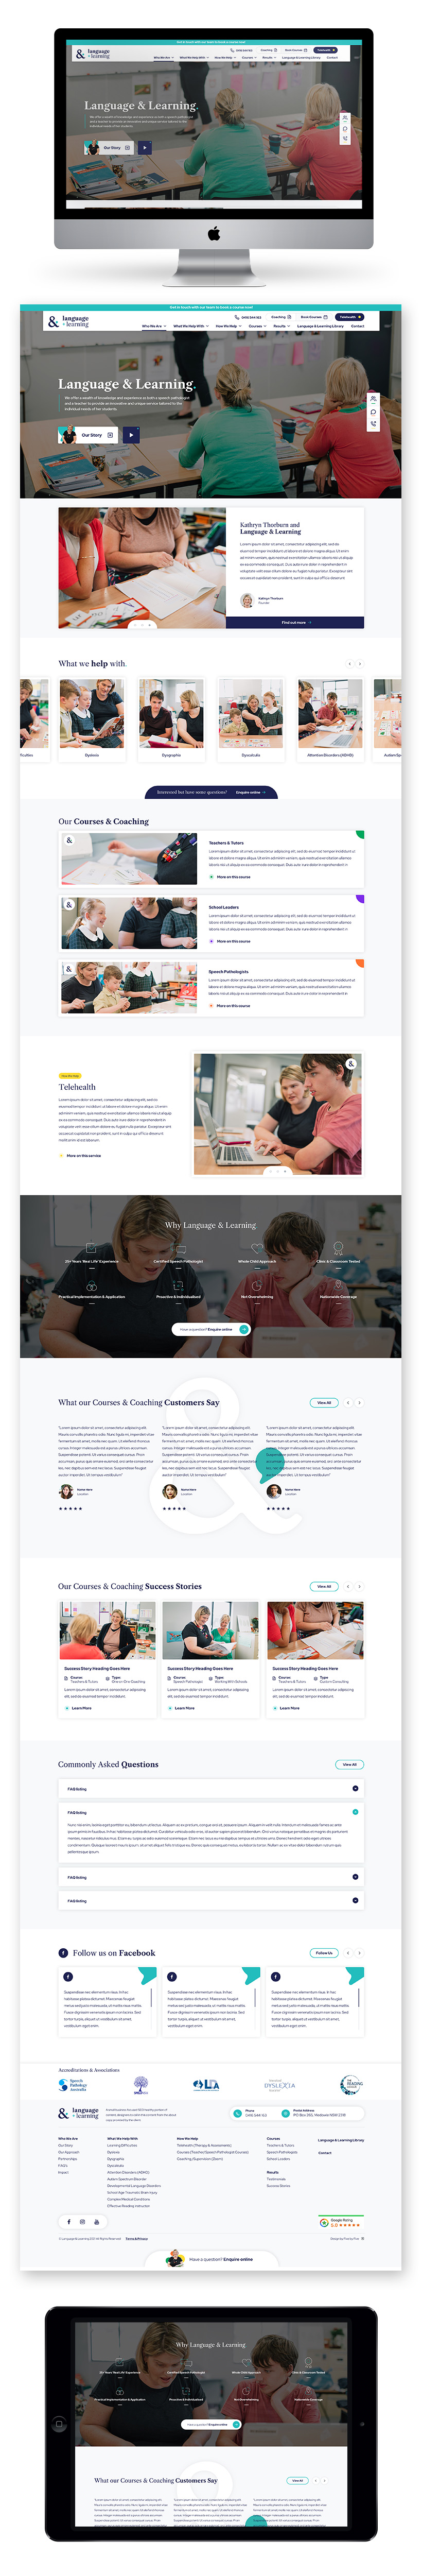 Language & Learning Site